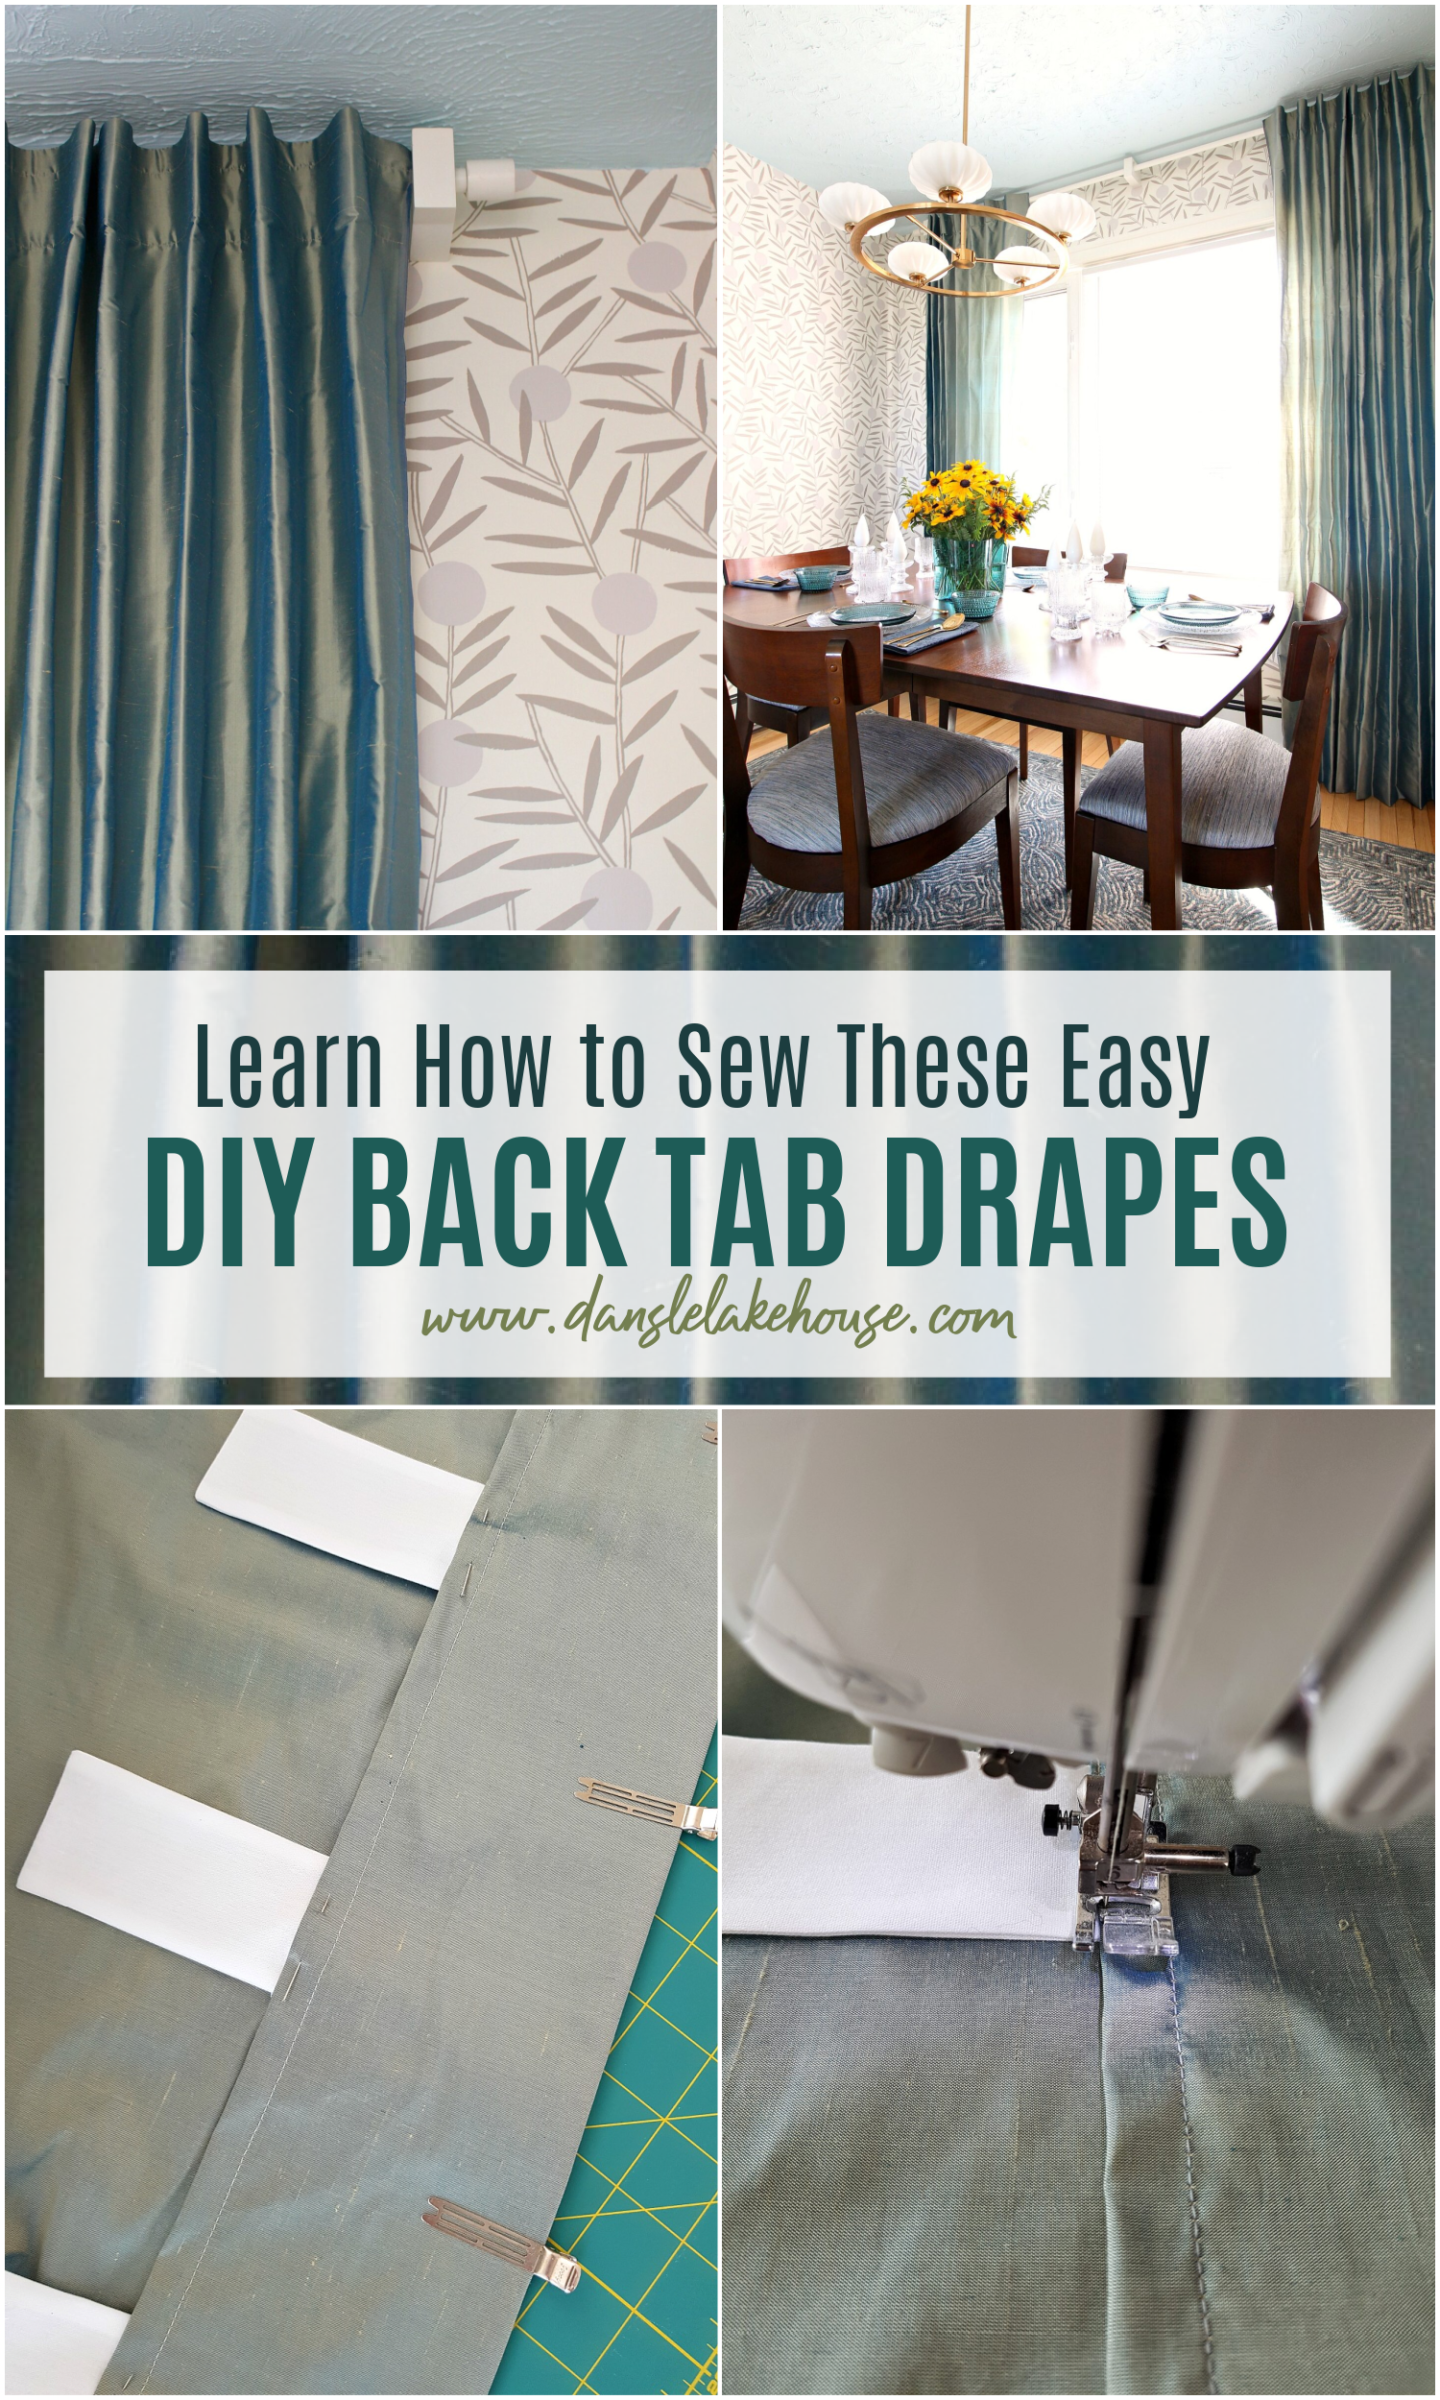 Learn How to Sew These Easy DIY Back Tab Drapes